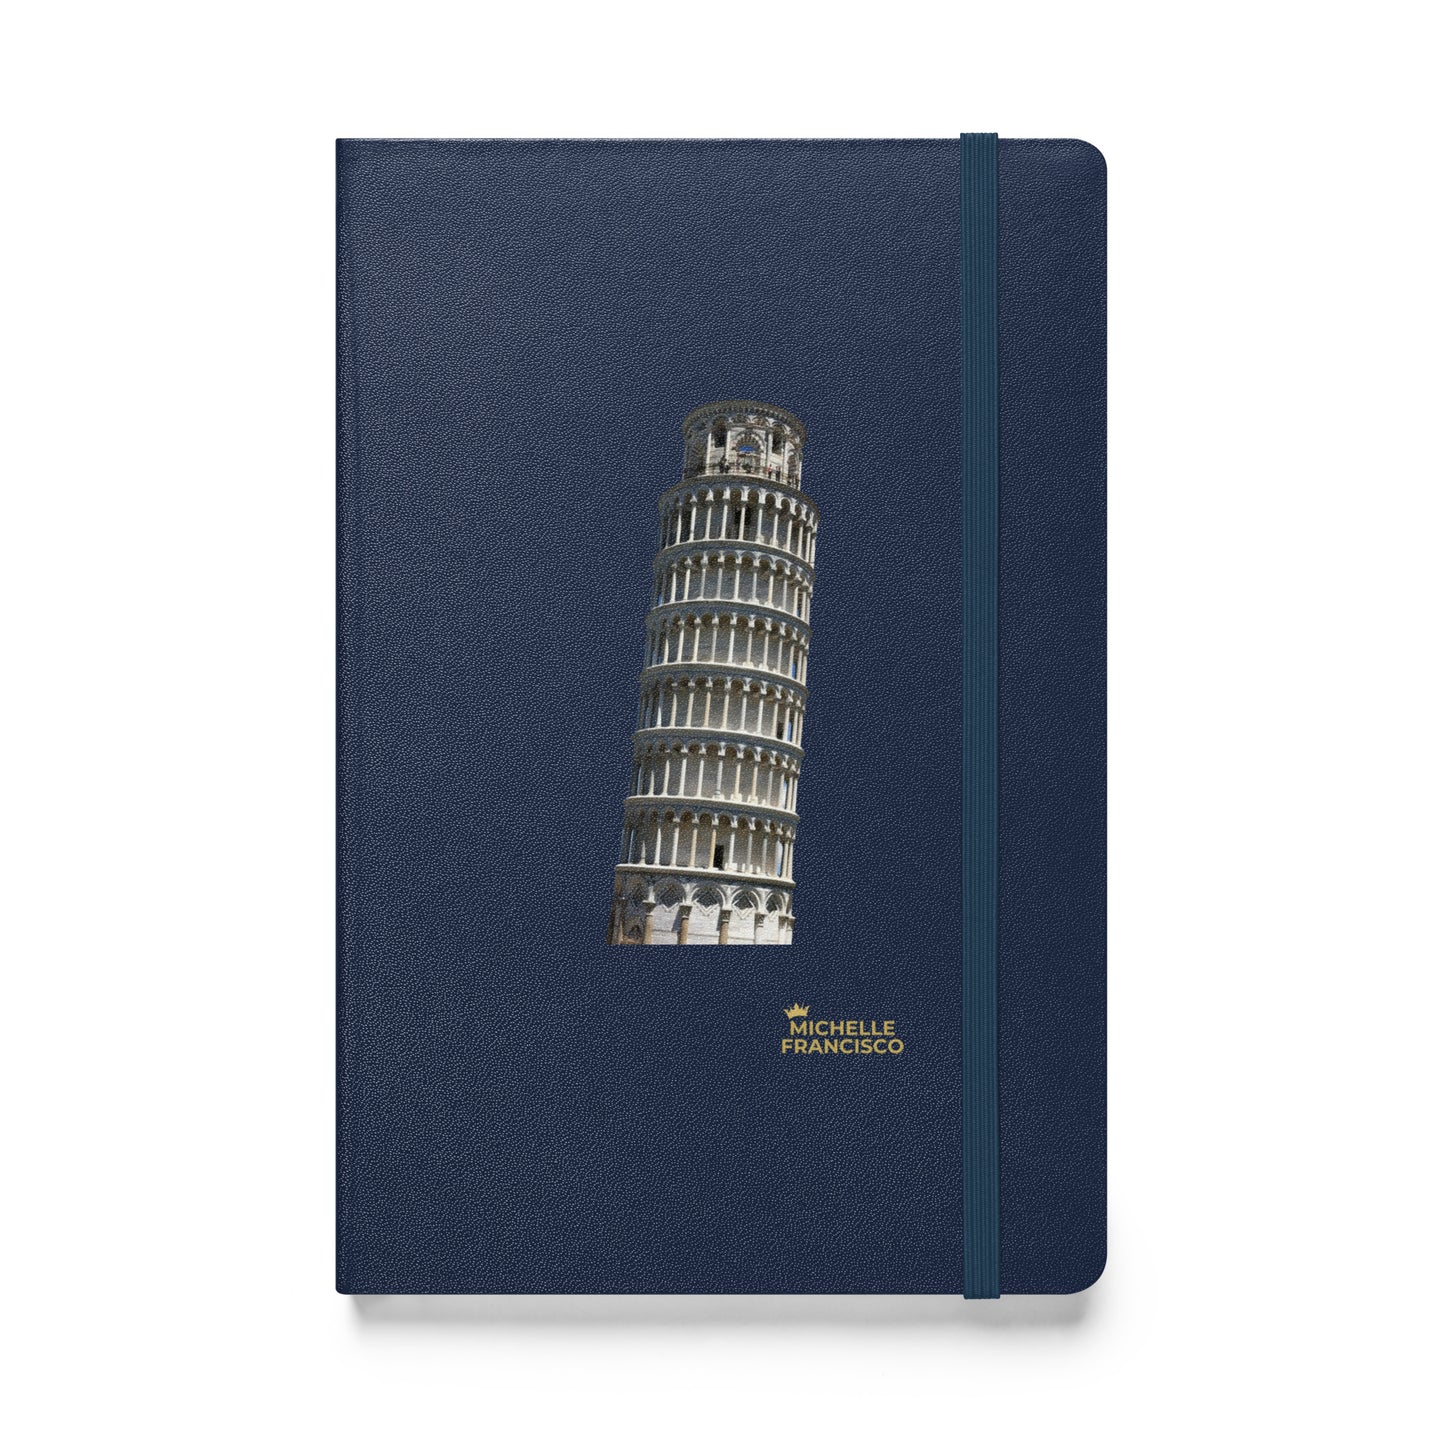 Tower of Pisa Hardcover Bound Notebook